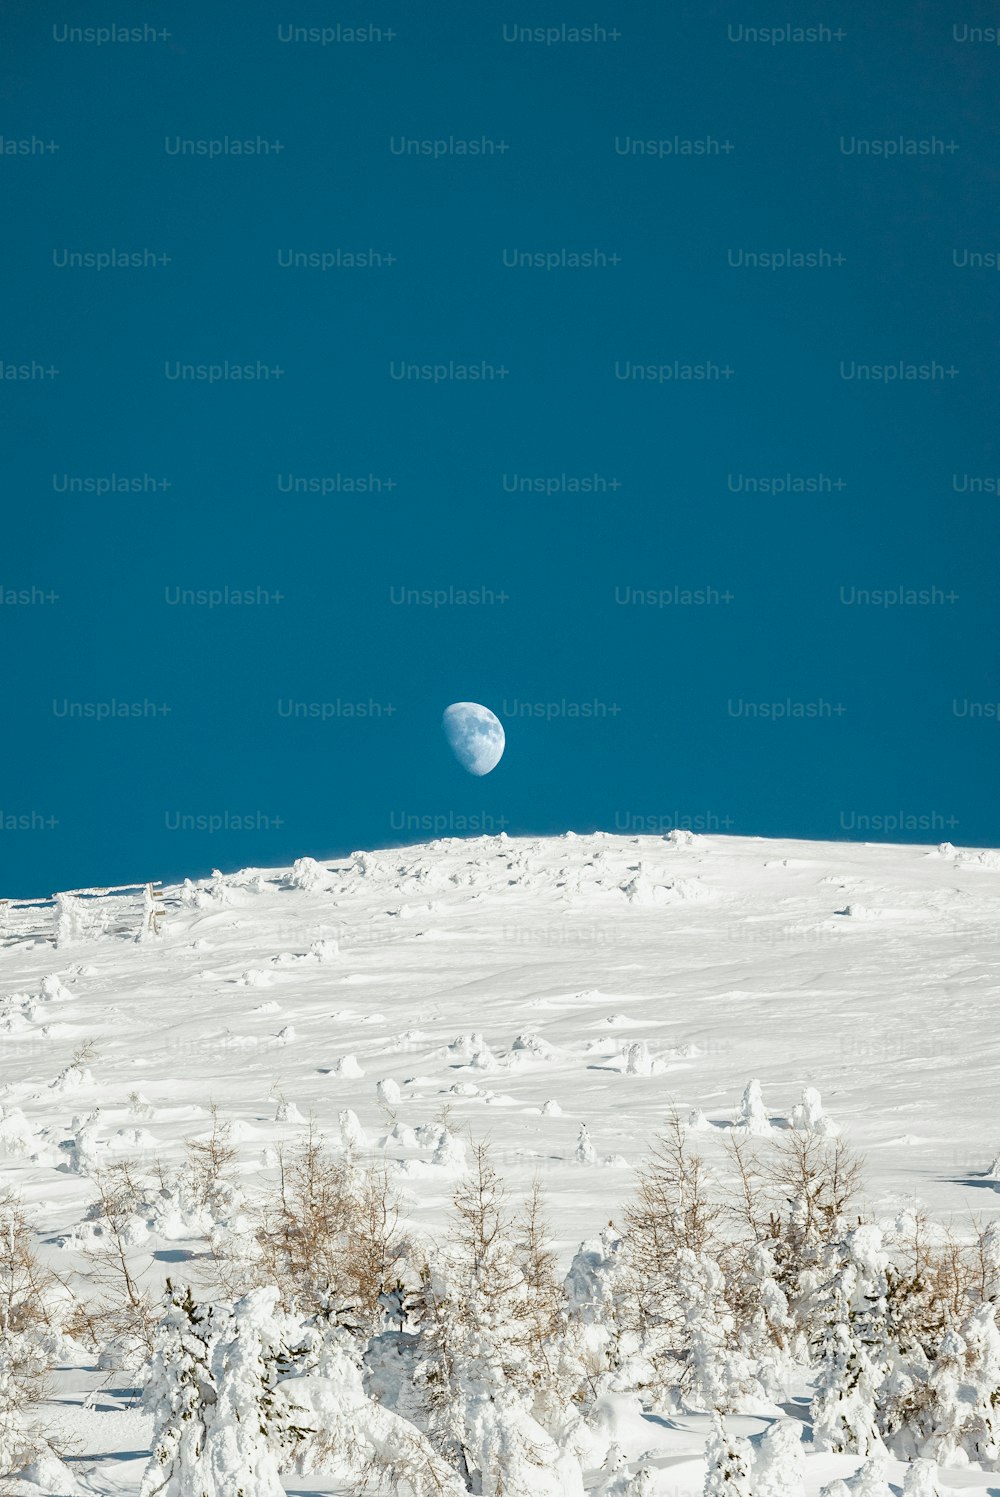 a view of the moon from the top of a snowy hill